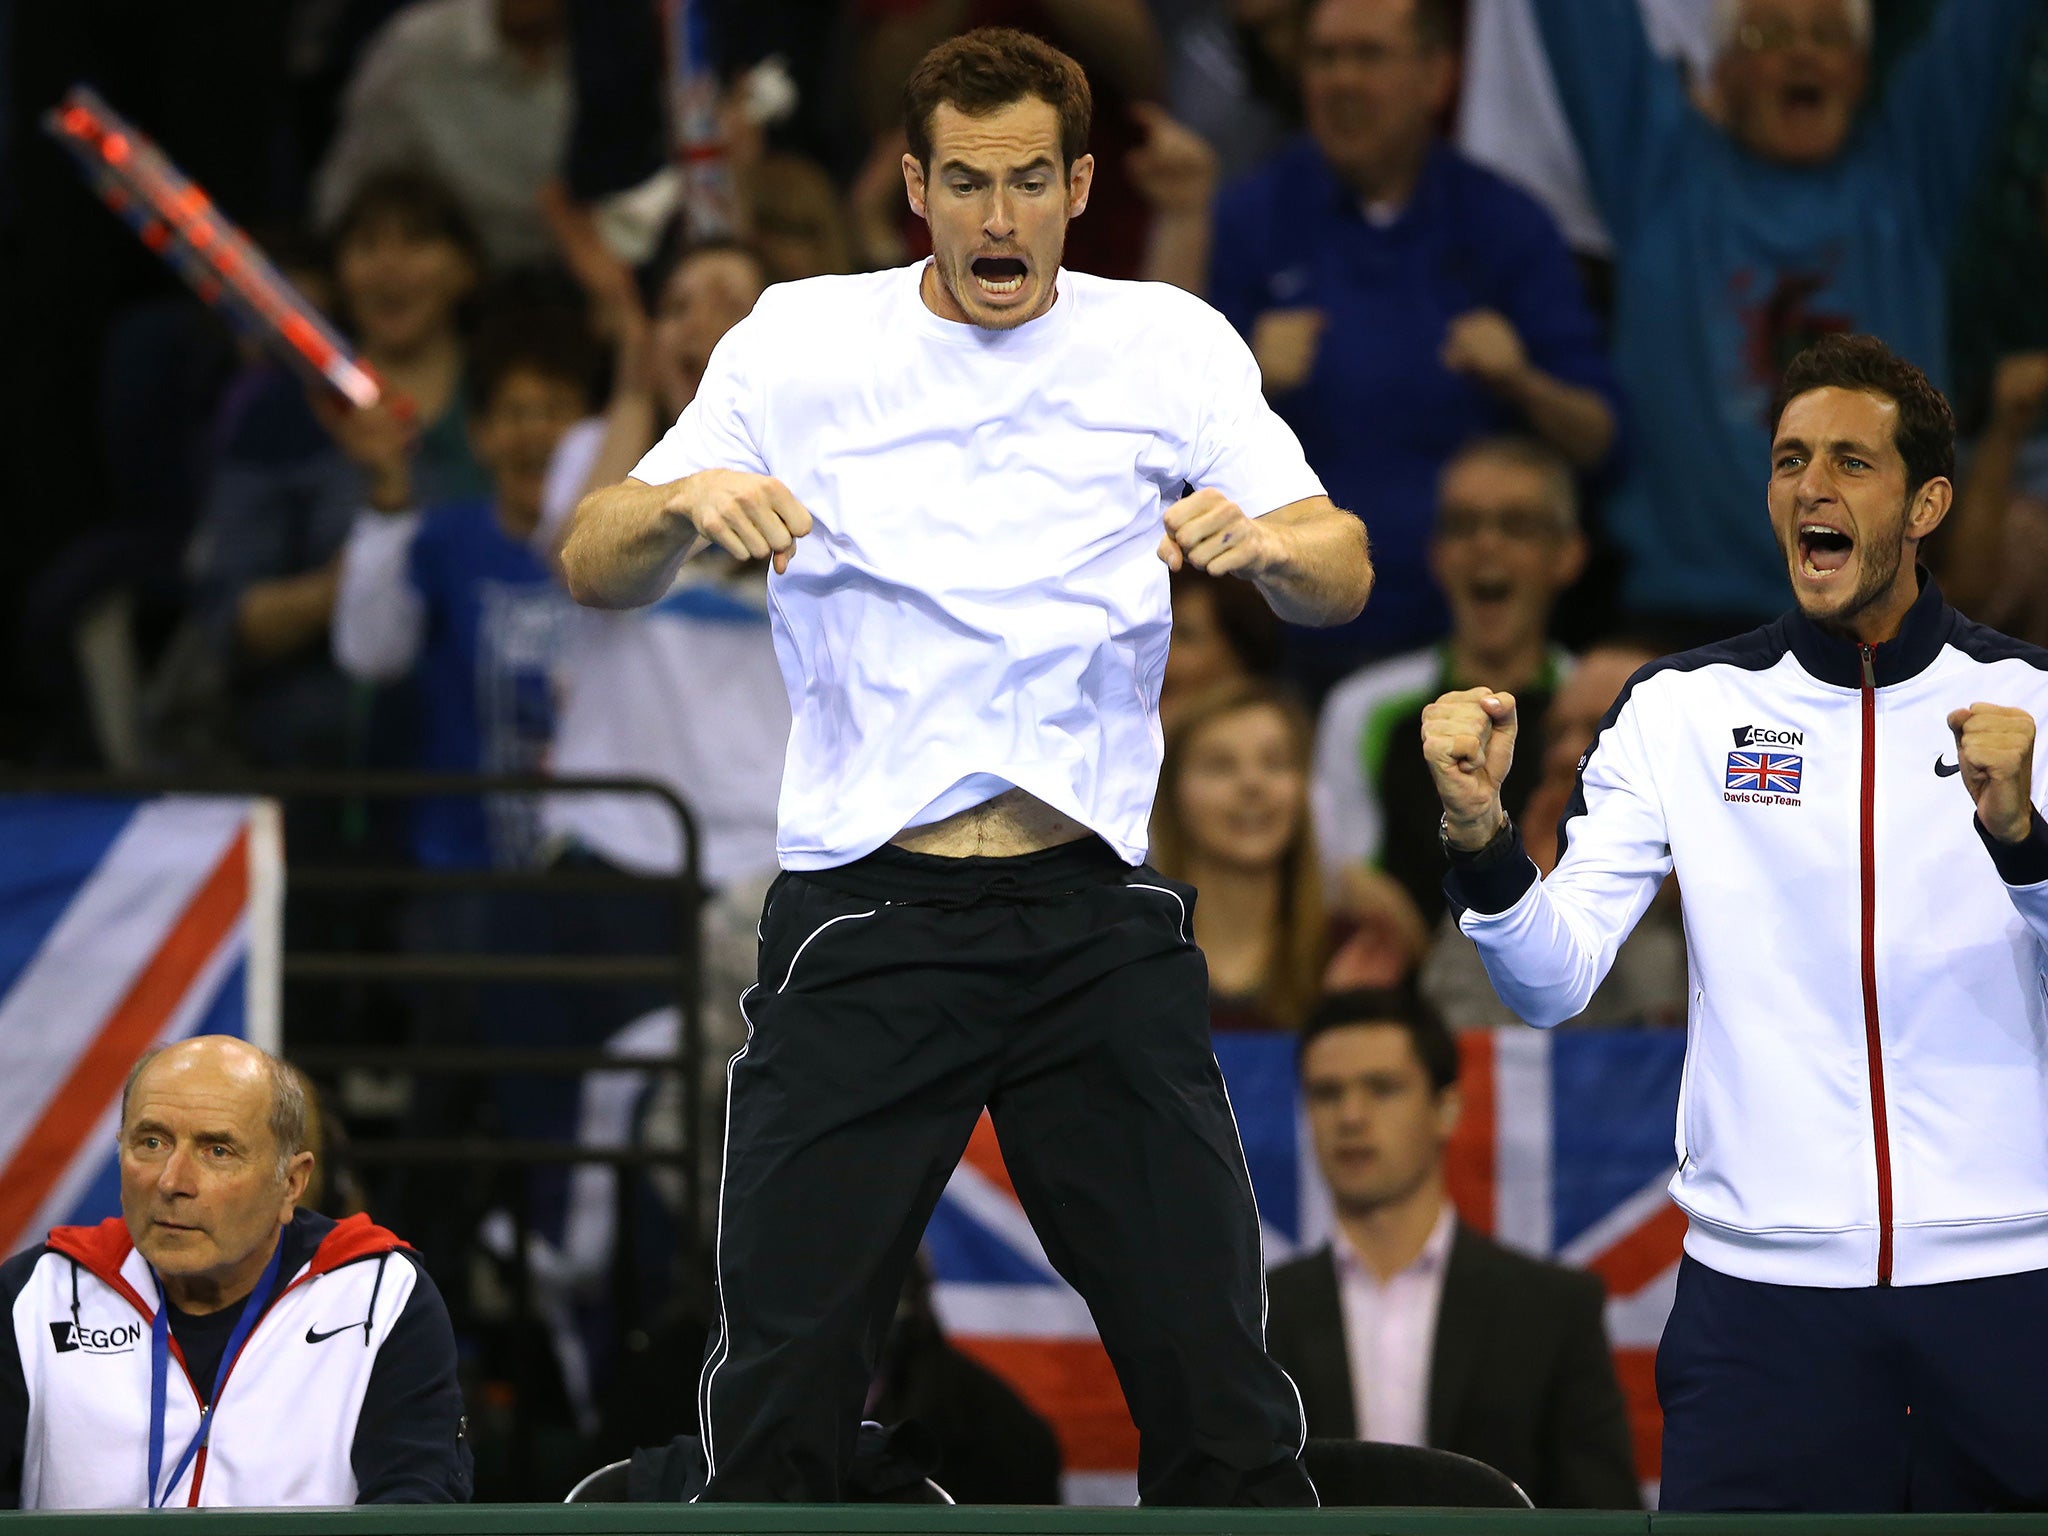 Andy Murray gets excited during his brother Jamie’s doubles match